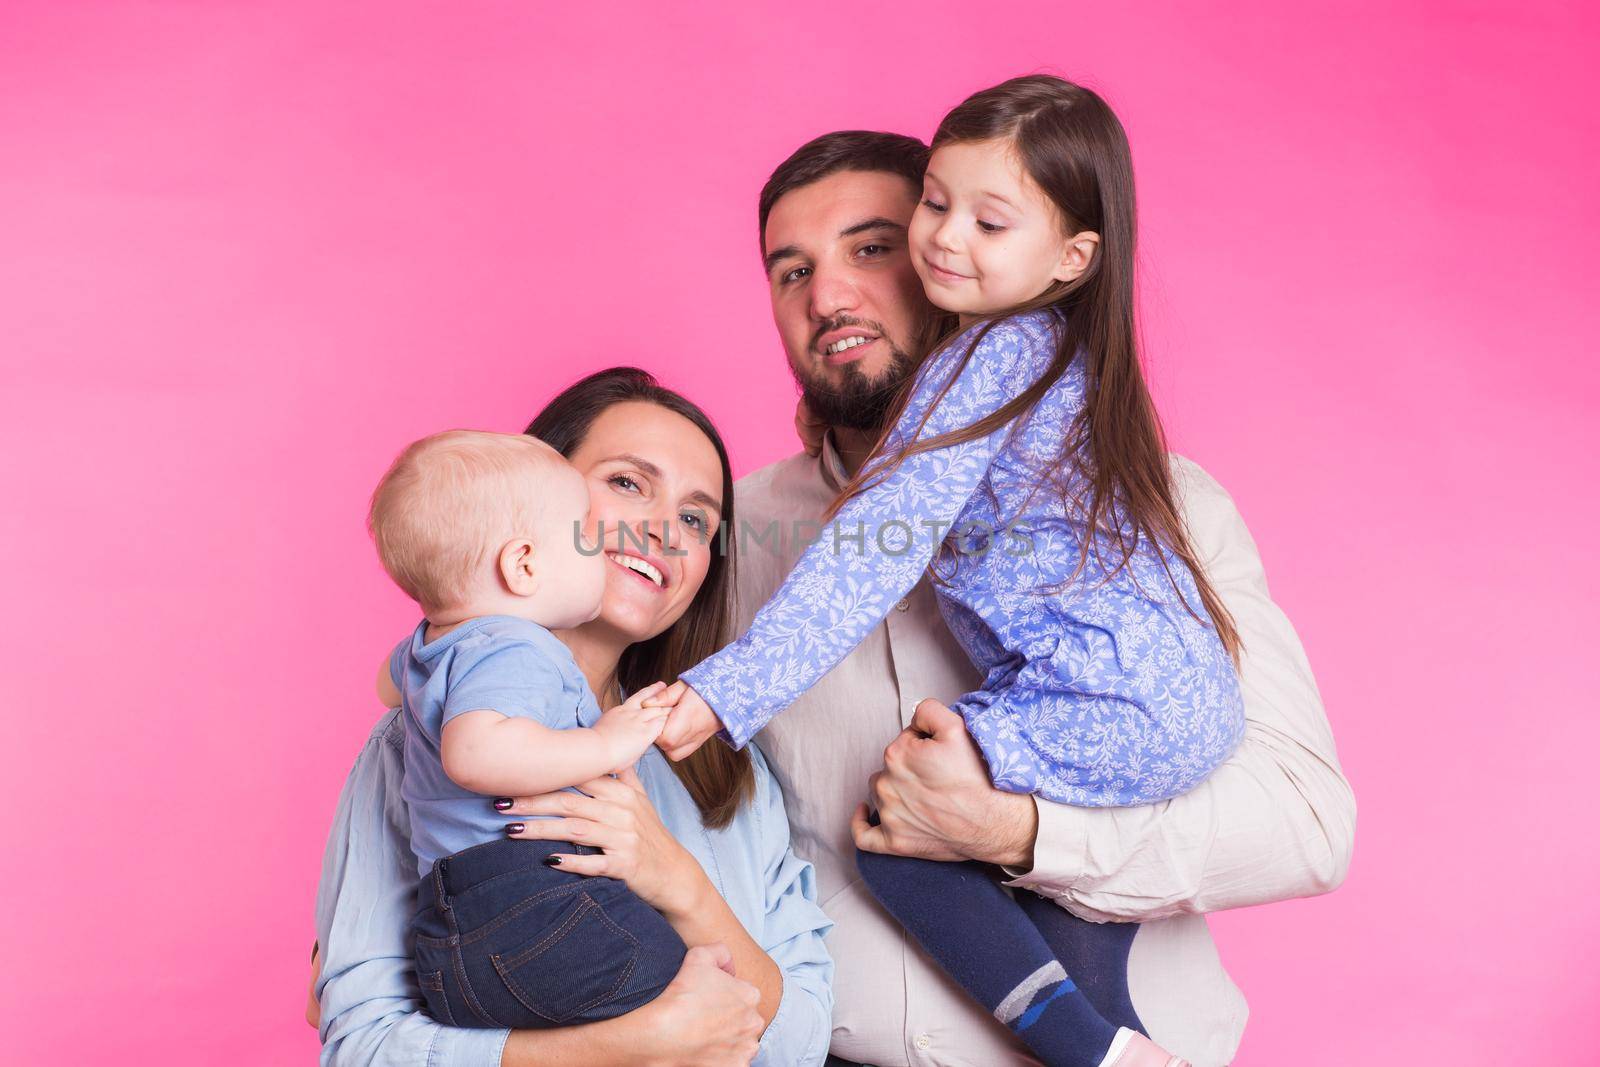 Portrait of Young Happy Mixed Race Family over pink background.